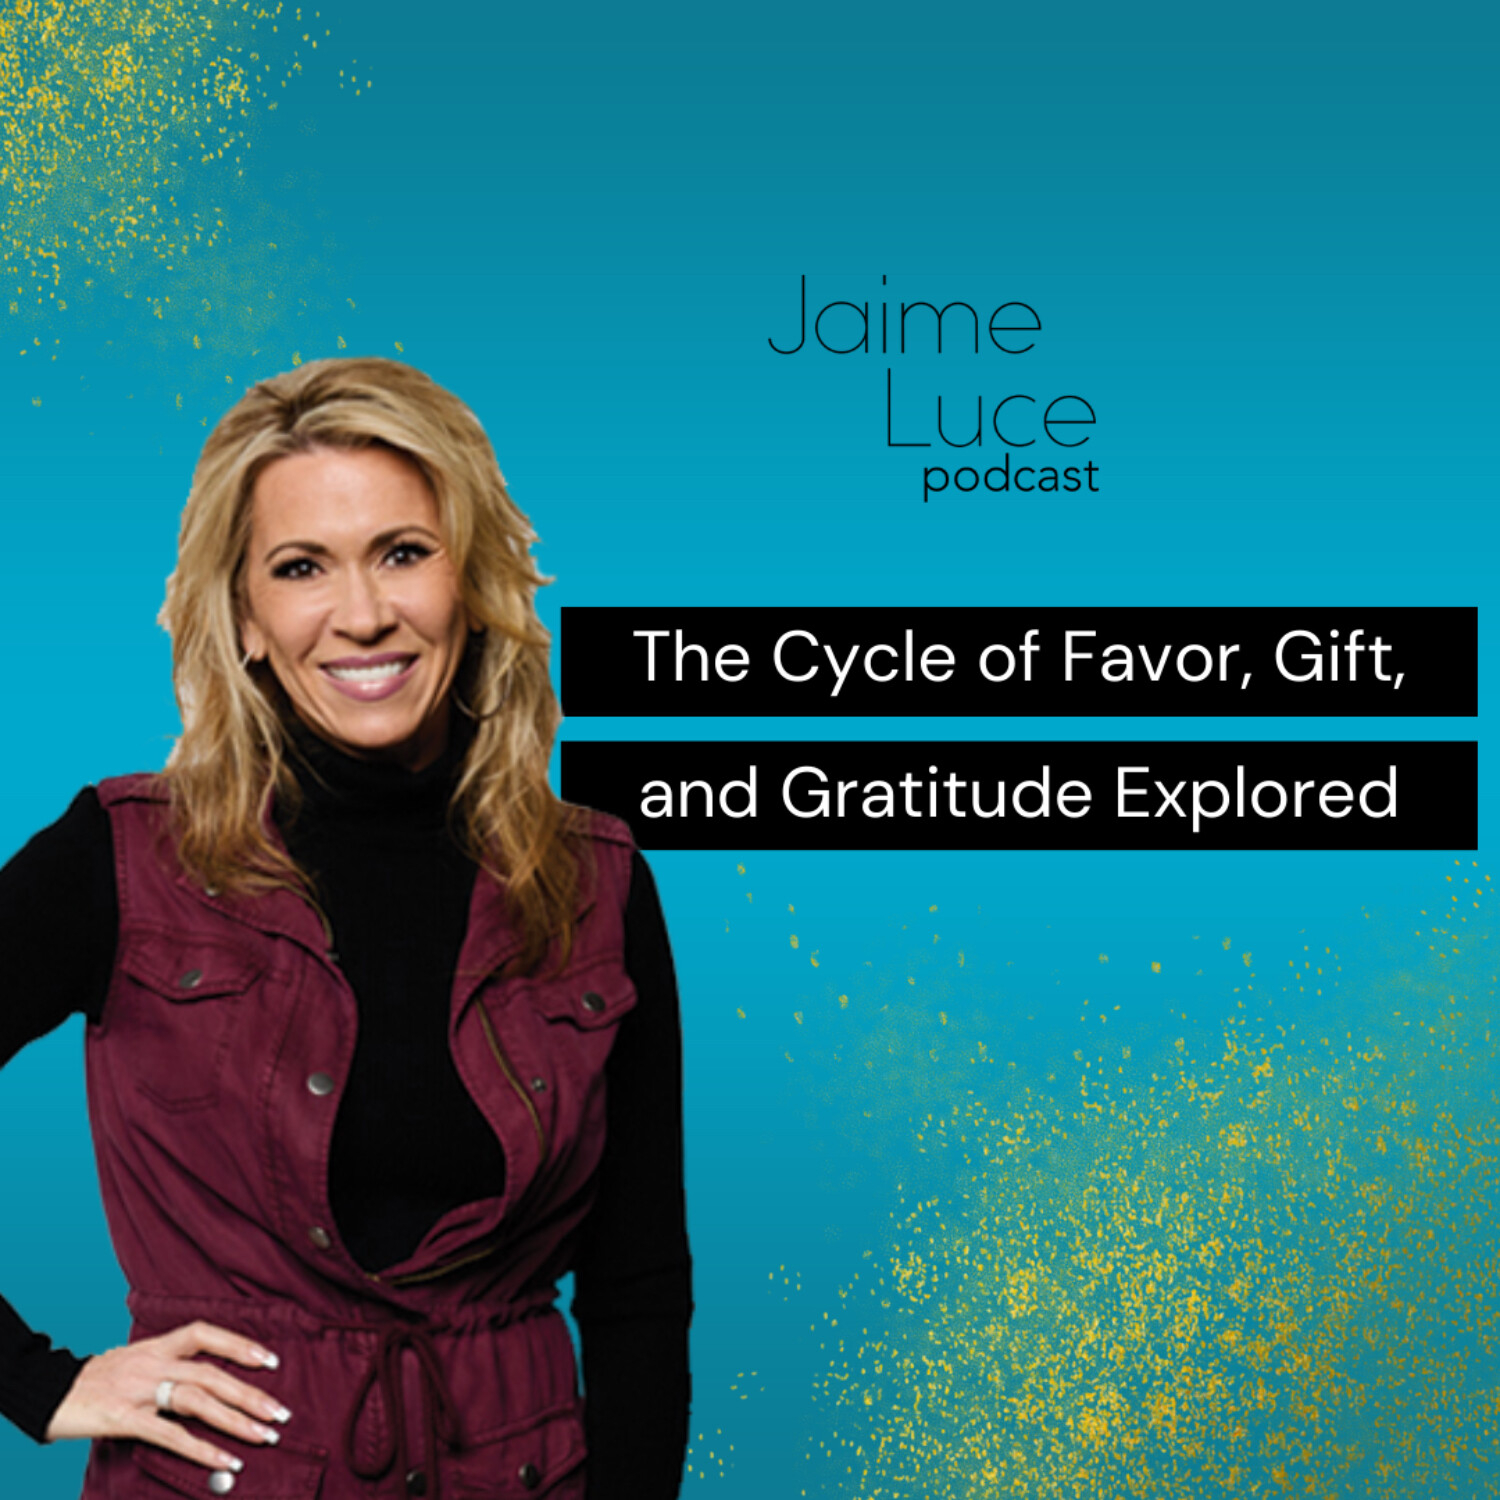 The Cycle of Favor, Gift, and Gratitude Explored